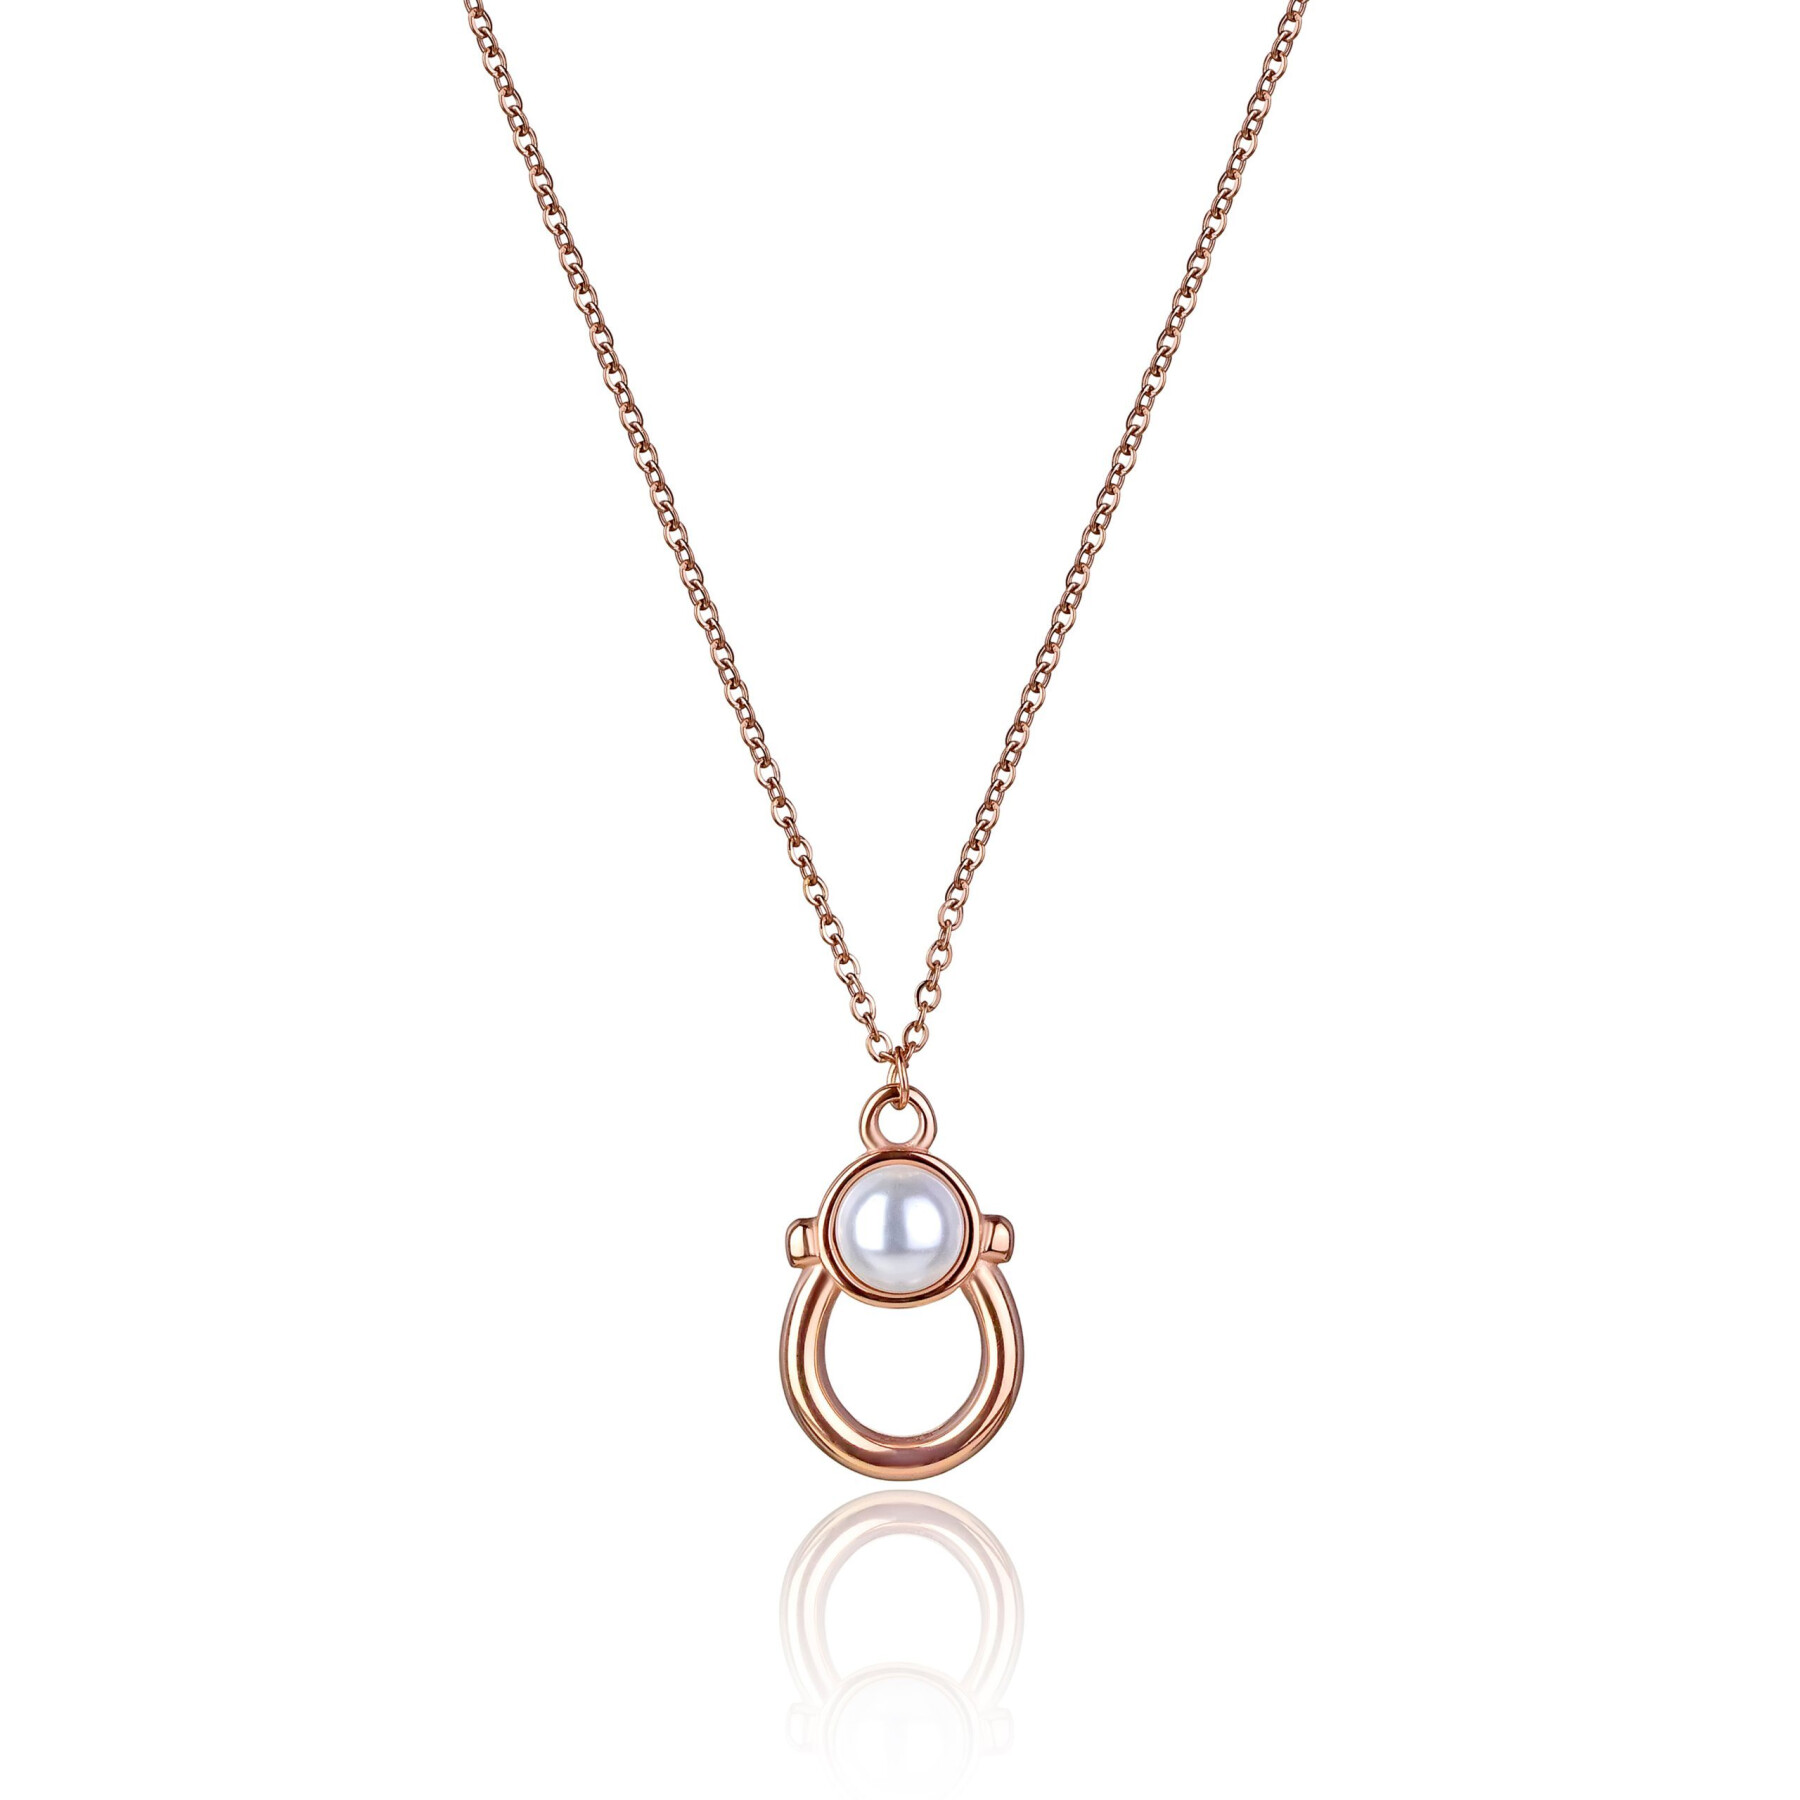 Women's necklace Isabella Ford Ada